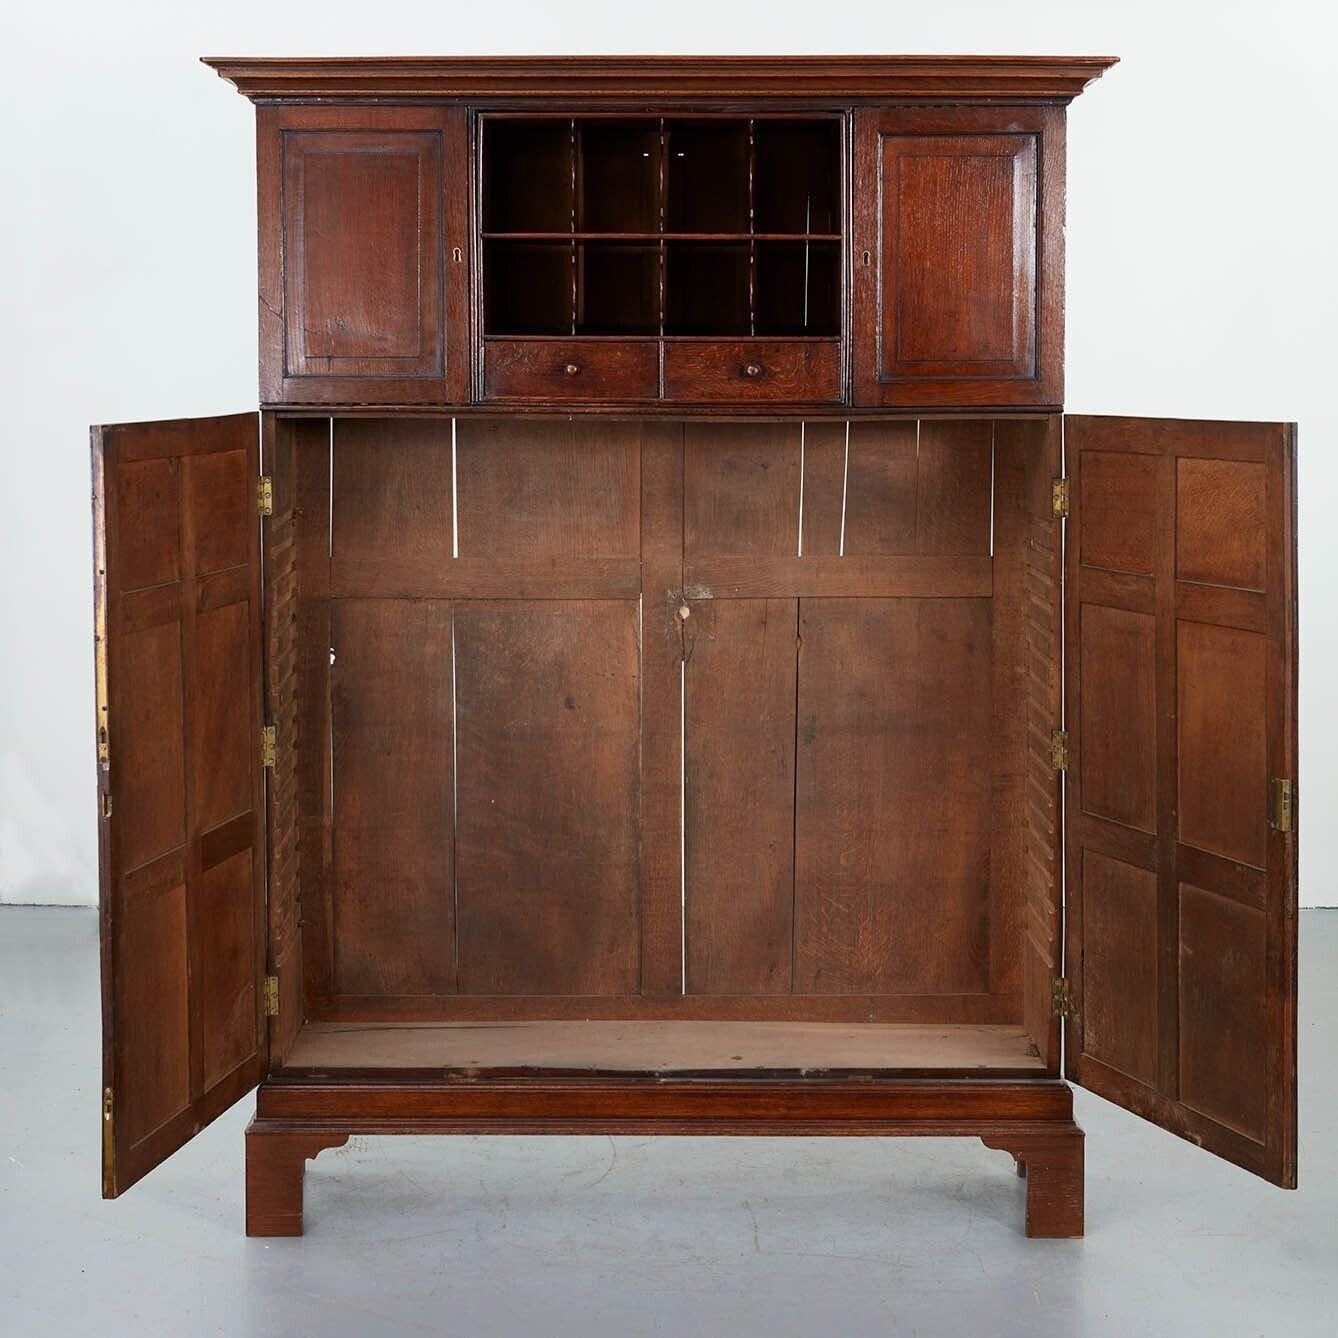 English Country House Estate Cabinet In Good Condition For Sale In Greenwich, CT